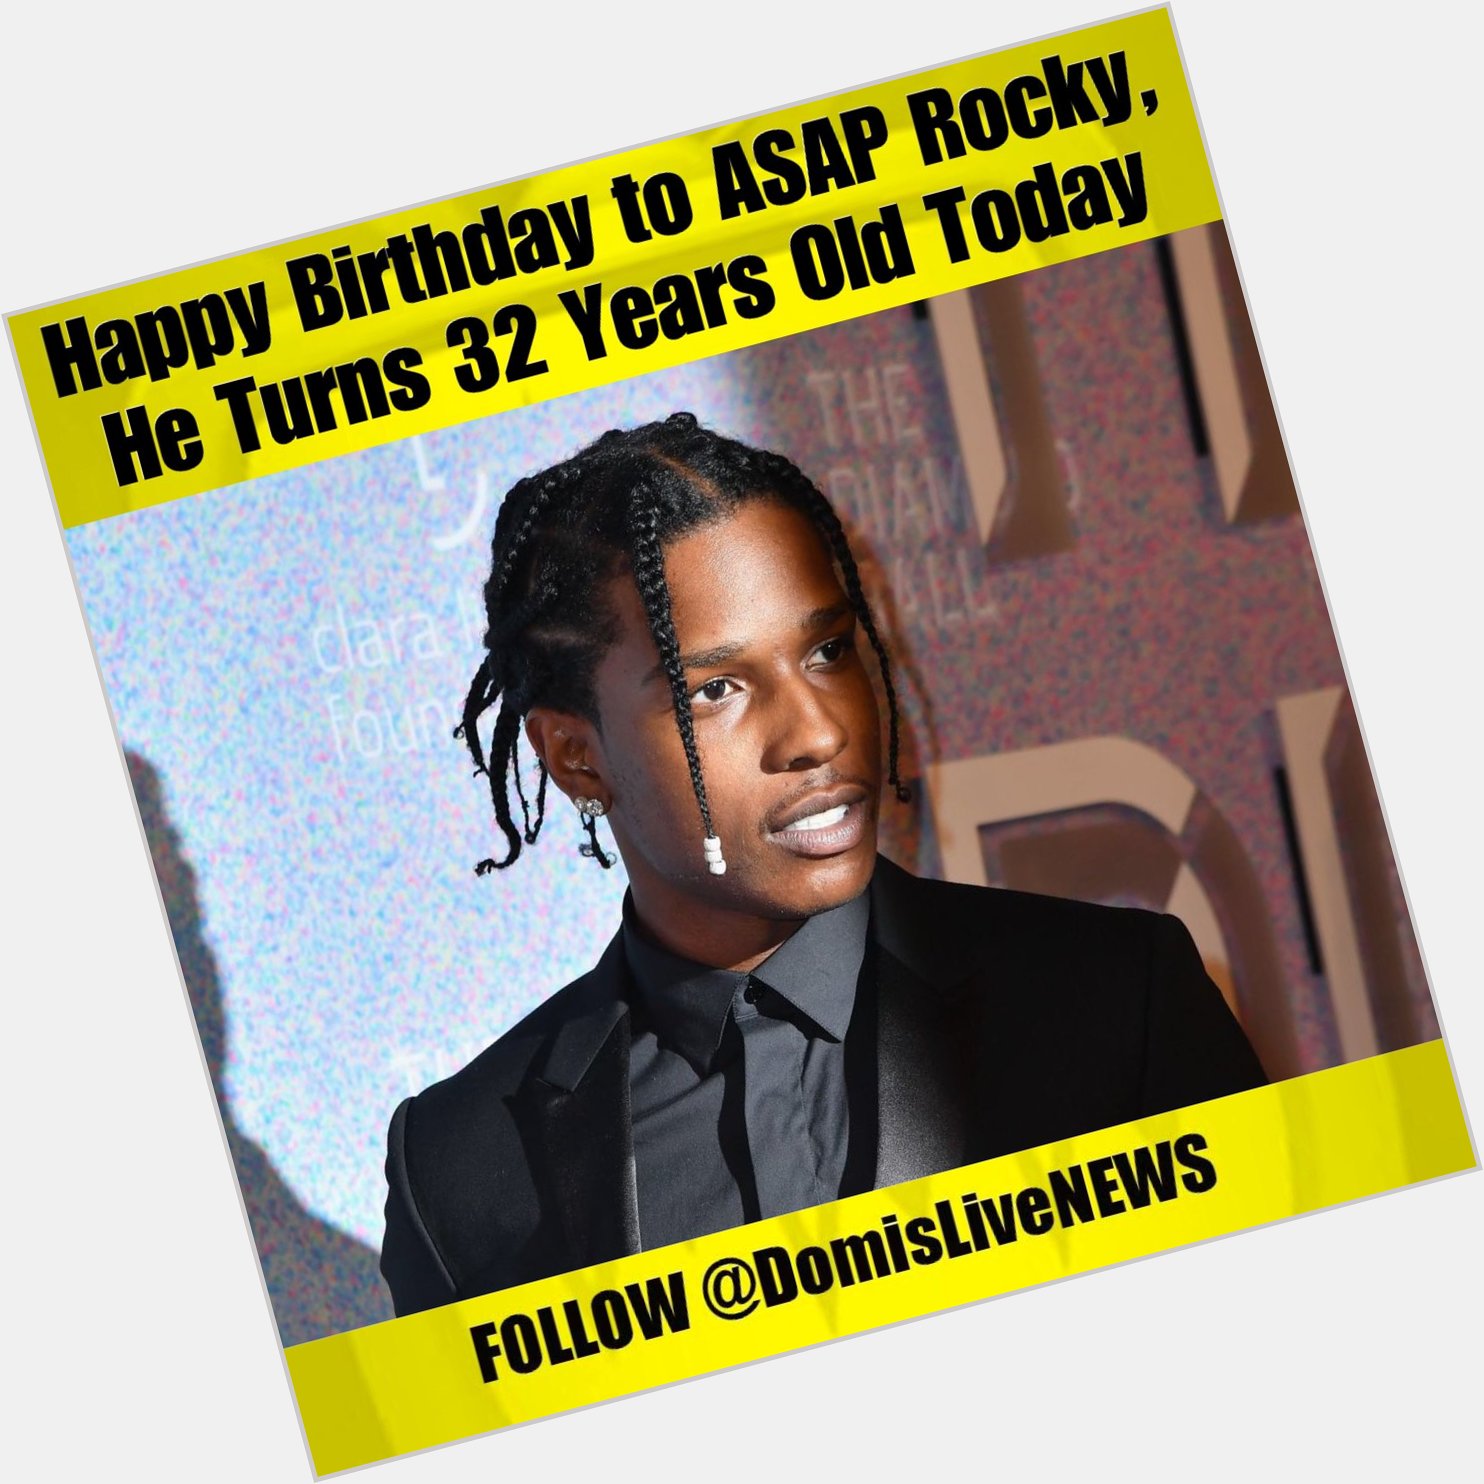 Happy Birthday to ASAP Rocky, He Turns 32 Years Old Today 